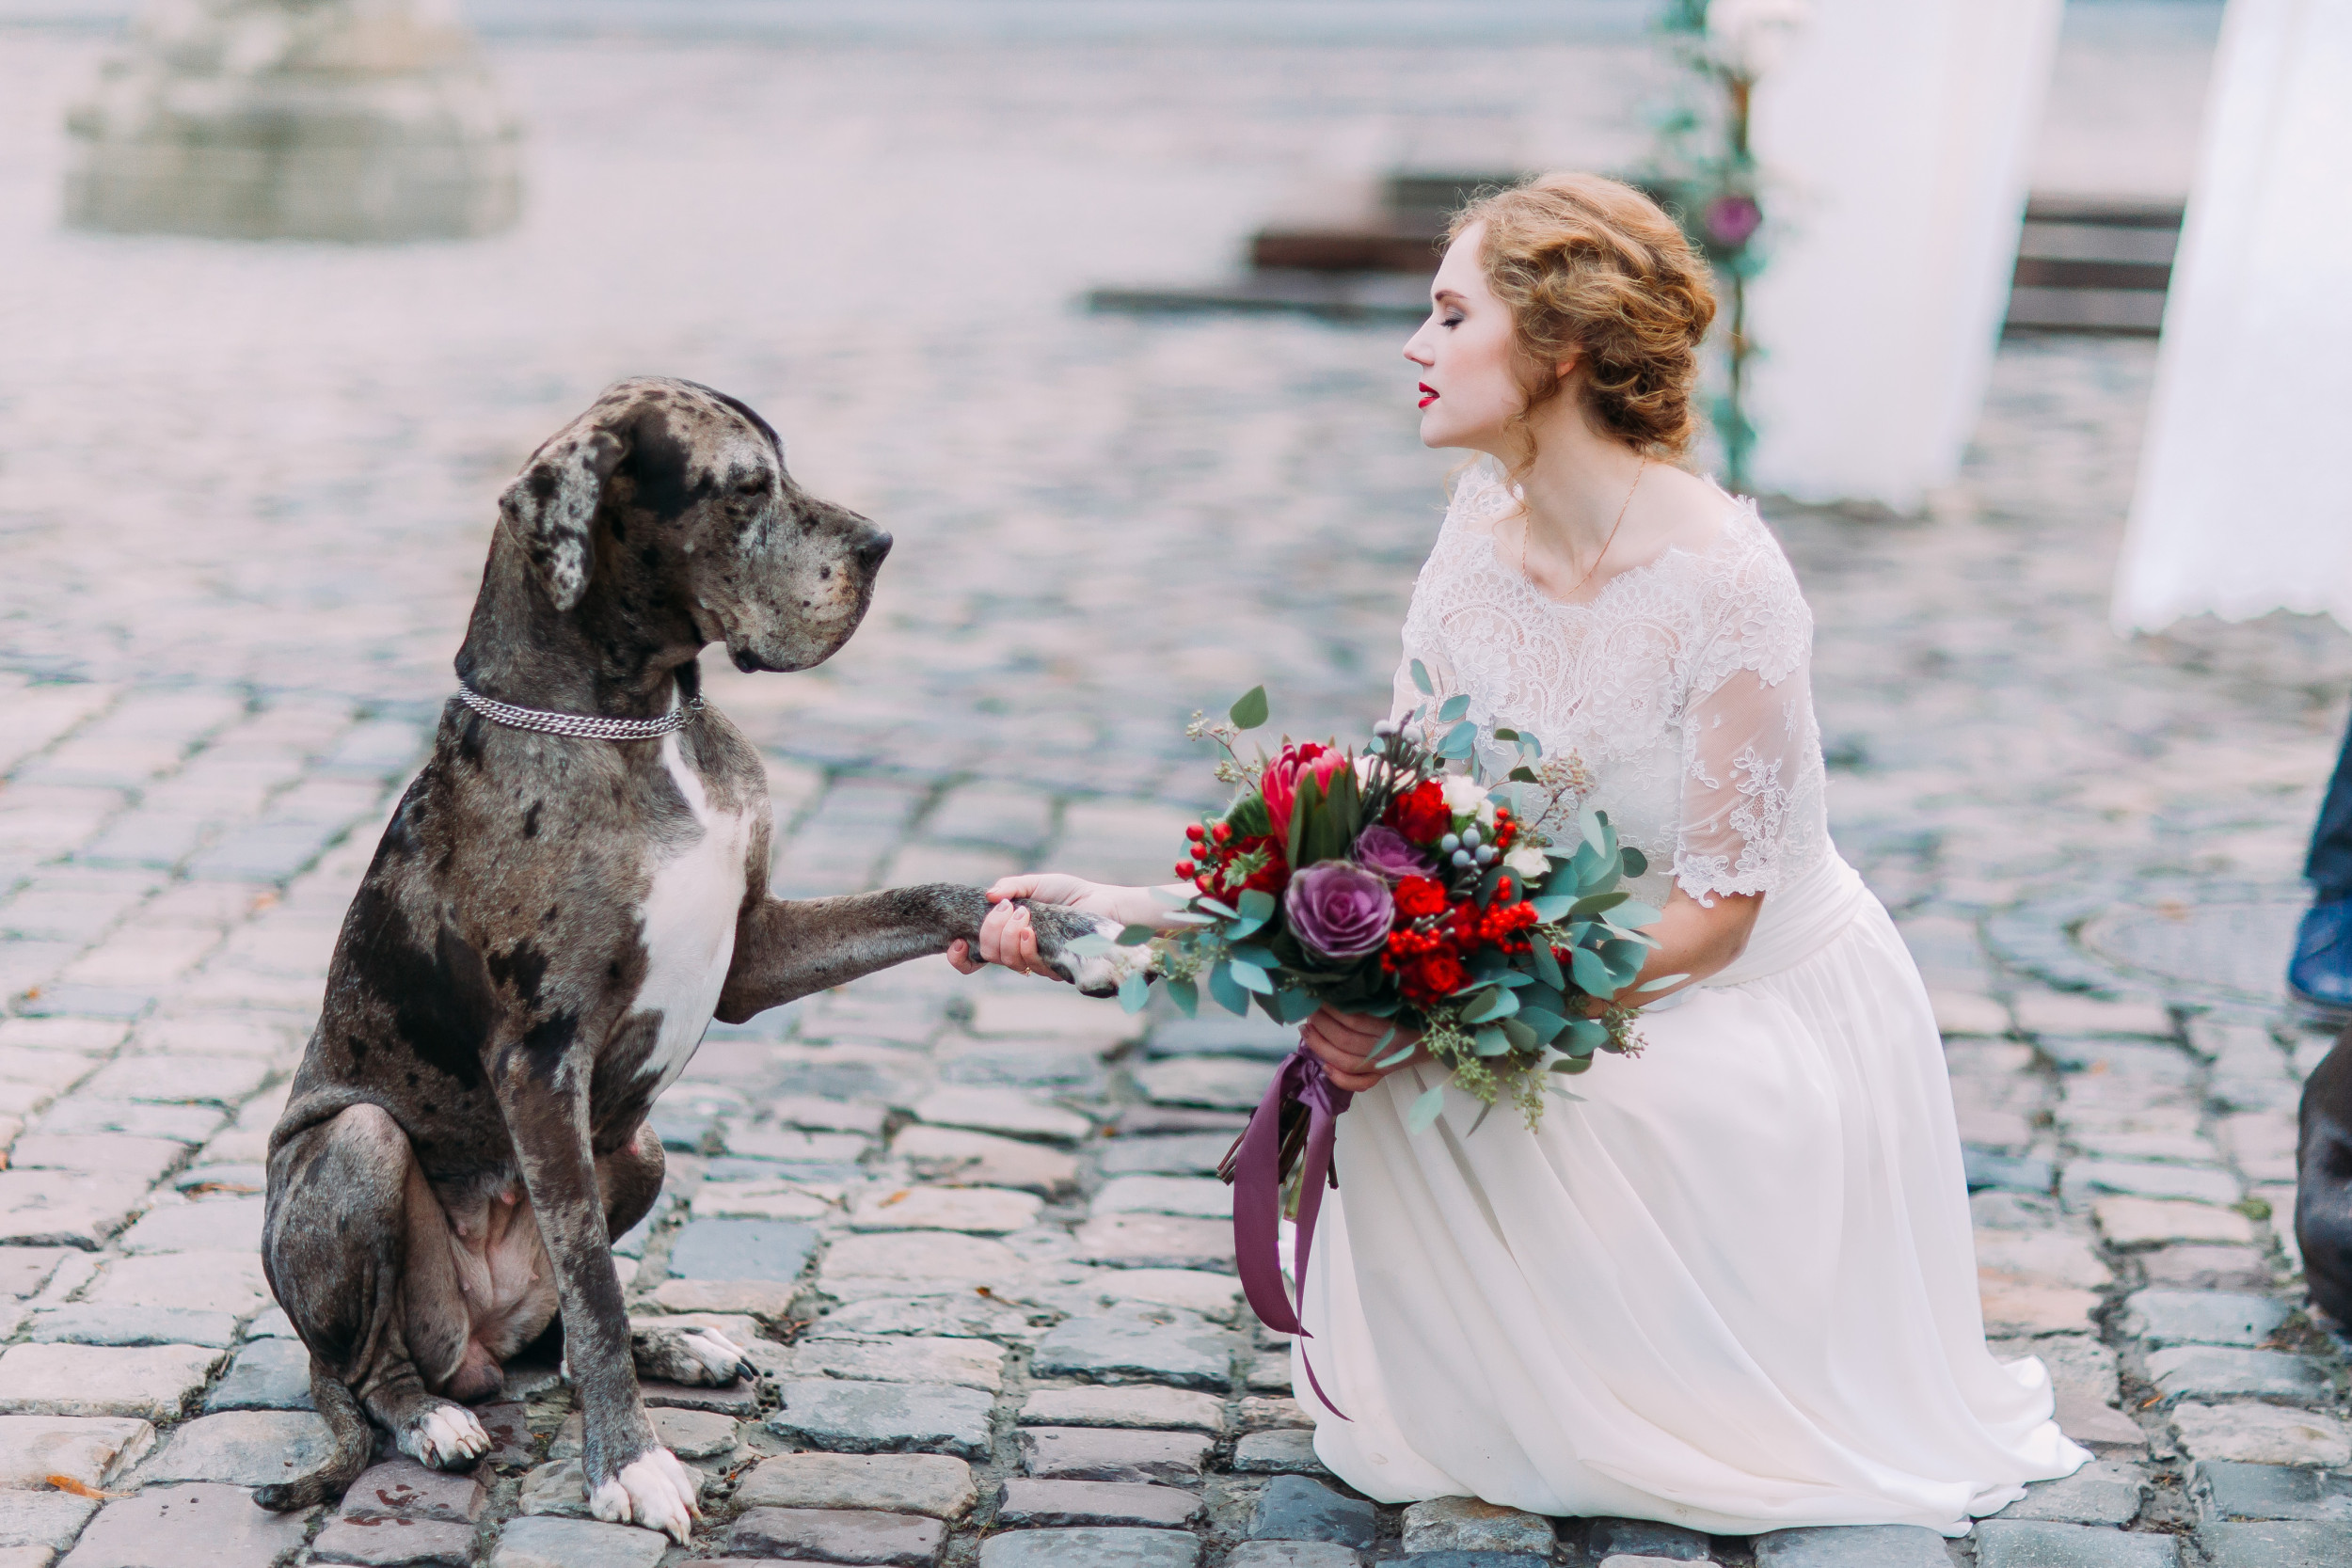 Bride’s First Dance Is Gatecrashed by Lovely Canine: ‘Stole the Present’